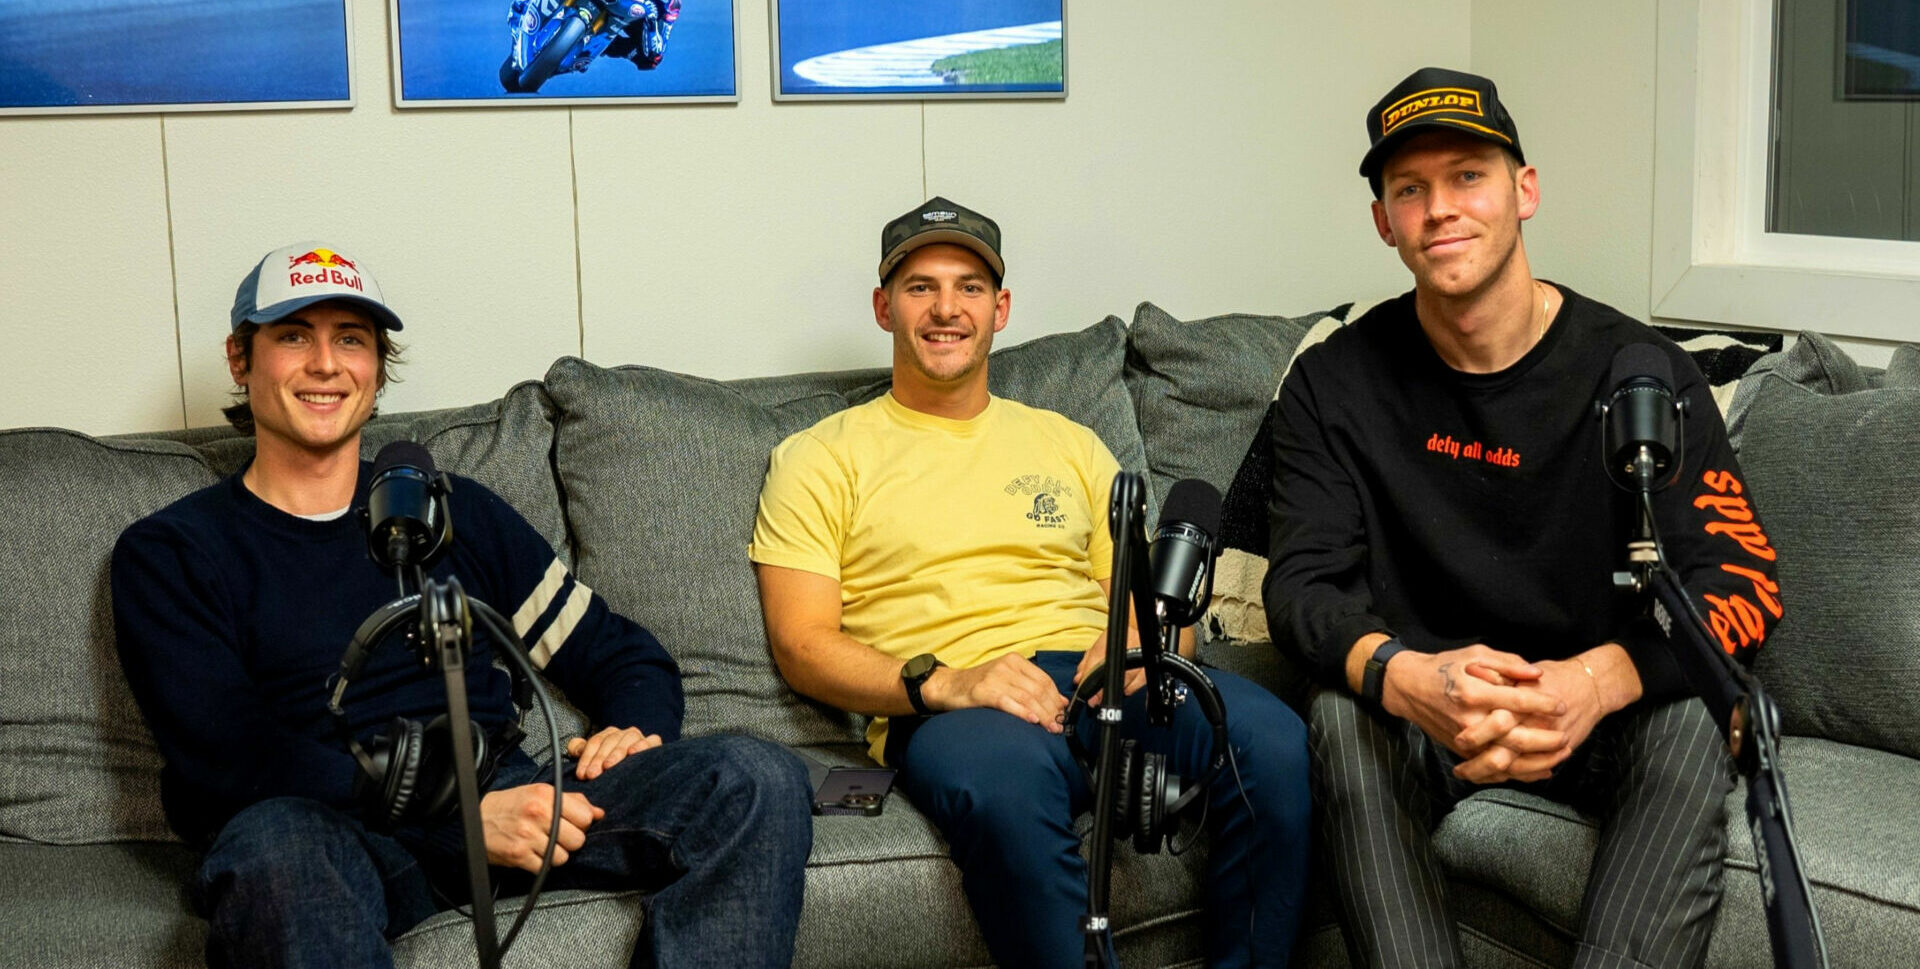 Pipe Dreams Podcast hosts James Rispoli (center) and Corey Alexander (right) with guest Joe Roberts (left). Photo courtesy Pipe Dreams Podcast.